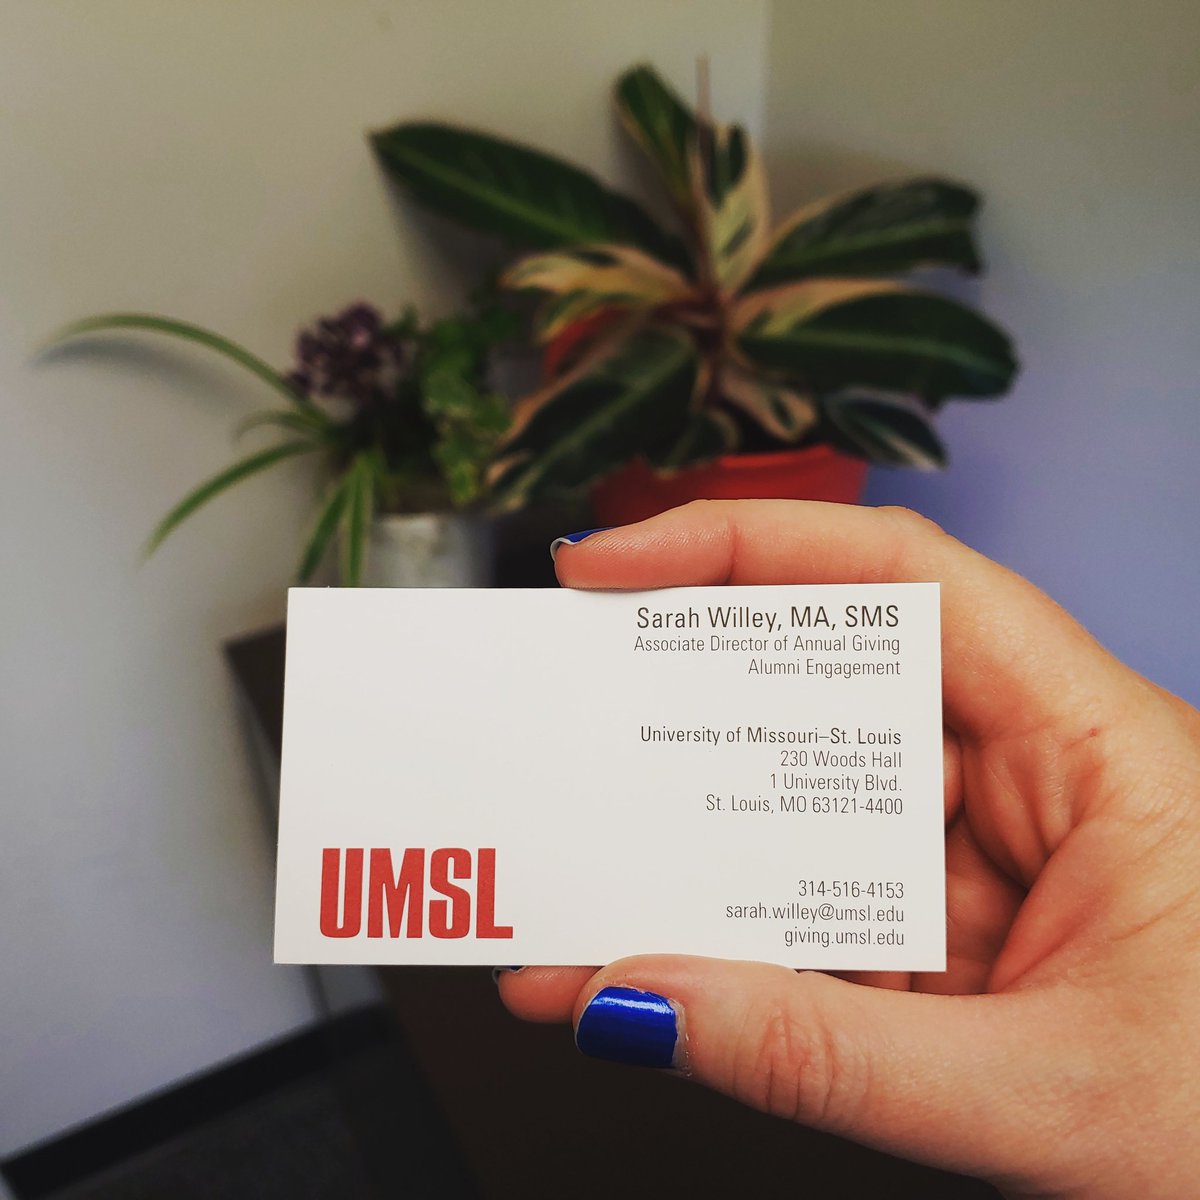 I feel so official now that my @umsl business cards are here!

#NewJob #UMSL #UMSLproud #BusinessCards
#Fundraising #AnnualGiving #AnnualFund #Alumni #MillennialFundraiser #NonprofitLife